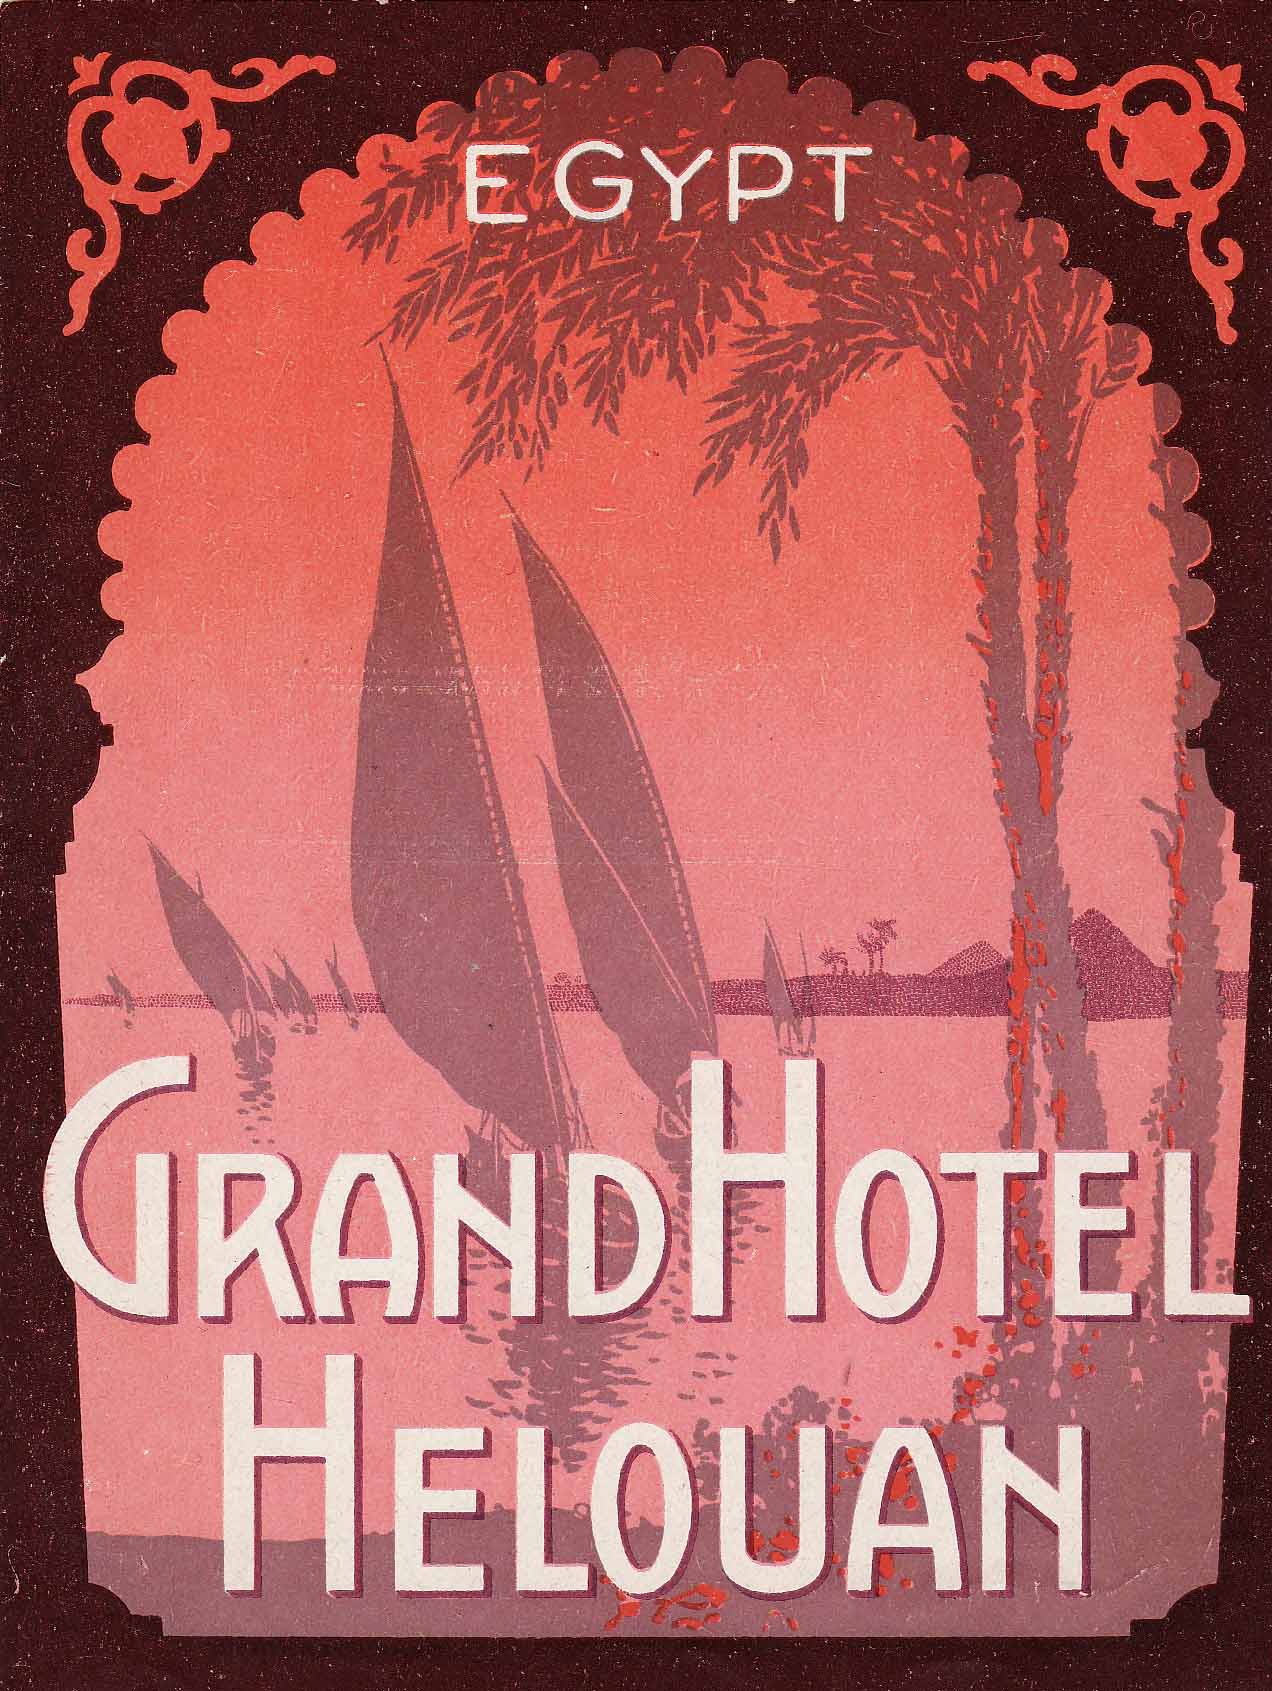 Hotel Luggage Labels Printed Sheet Grand Hotel Collection -  UK